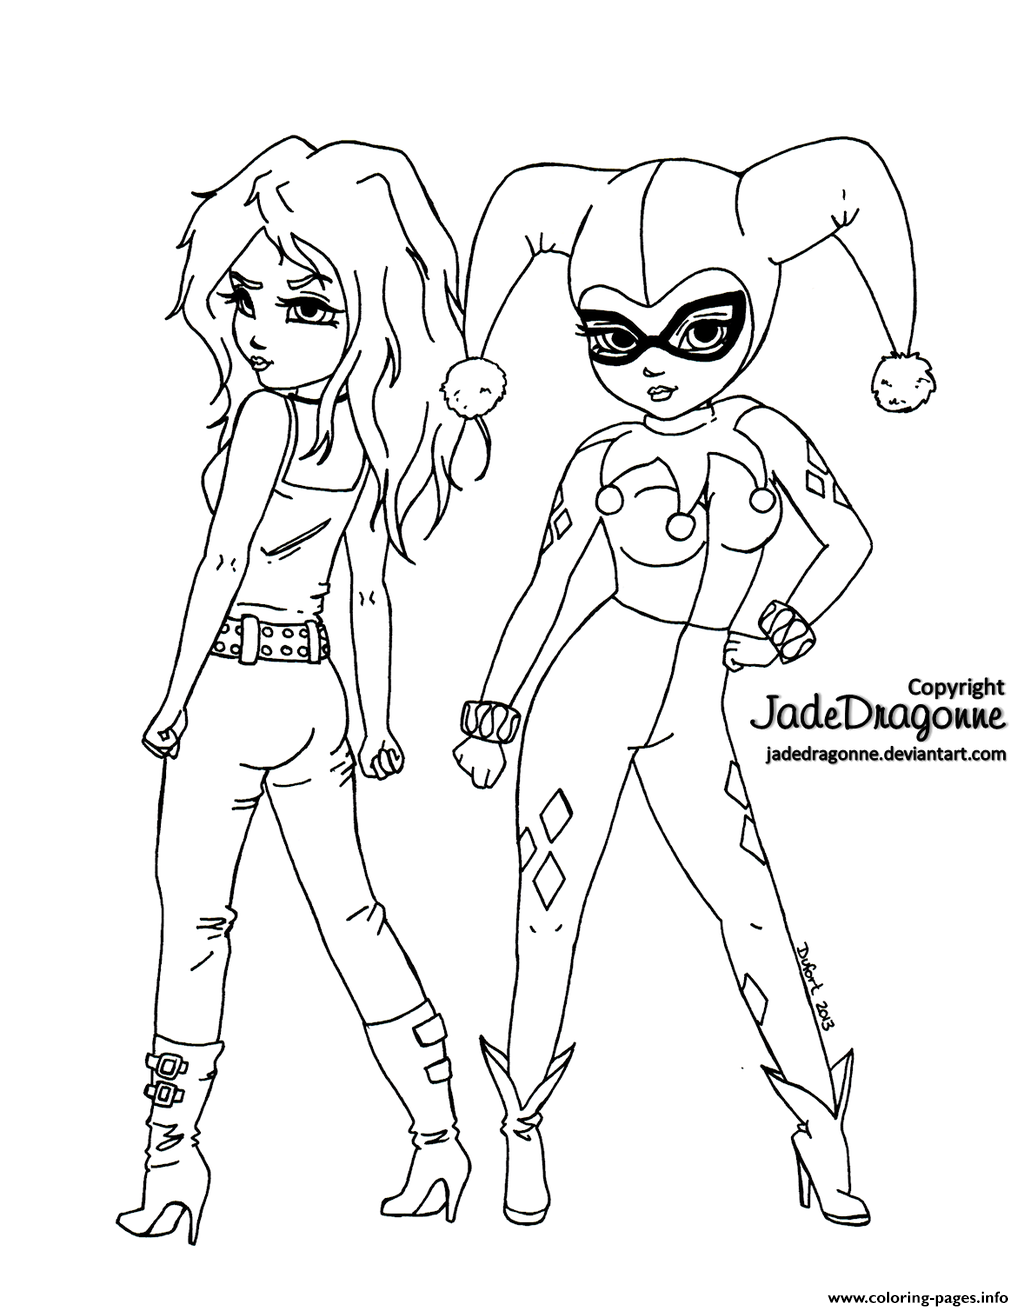 Two Girls Harley Quinn coloring